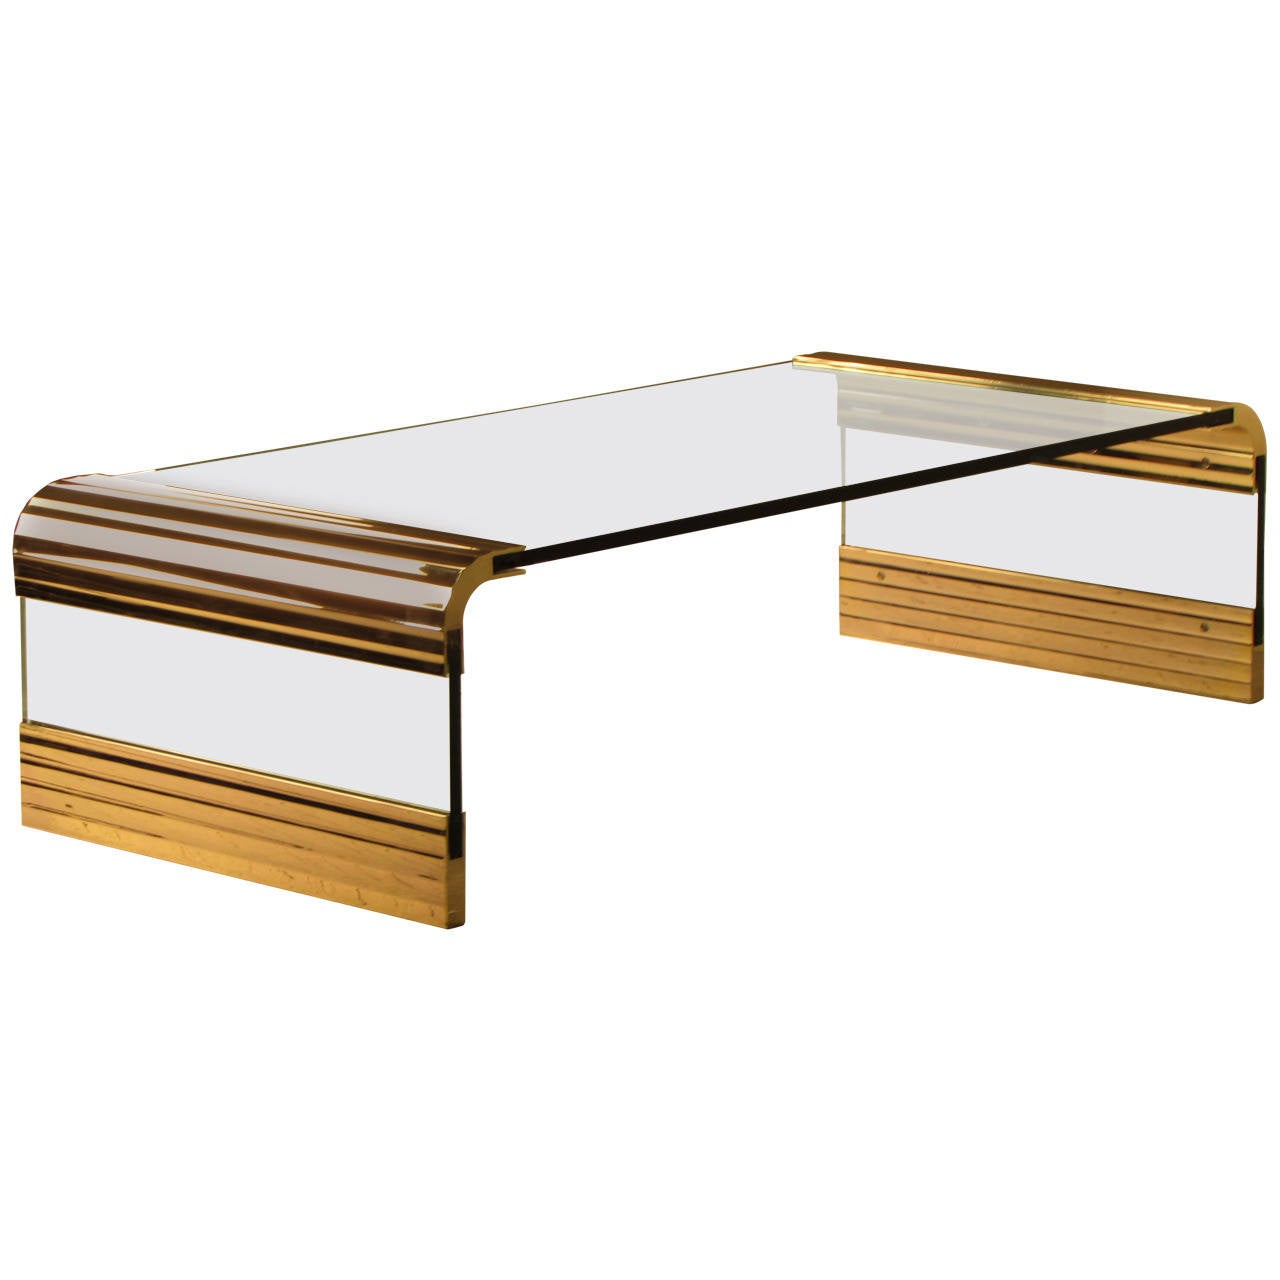 Leon Rosen for Pace Collection Scalloped Brass Waterfall Cocktail Table